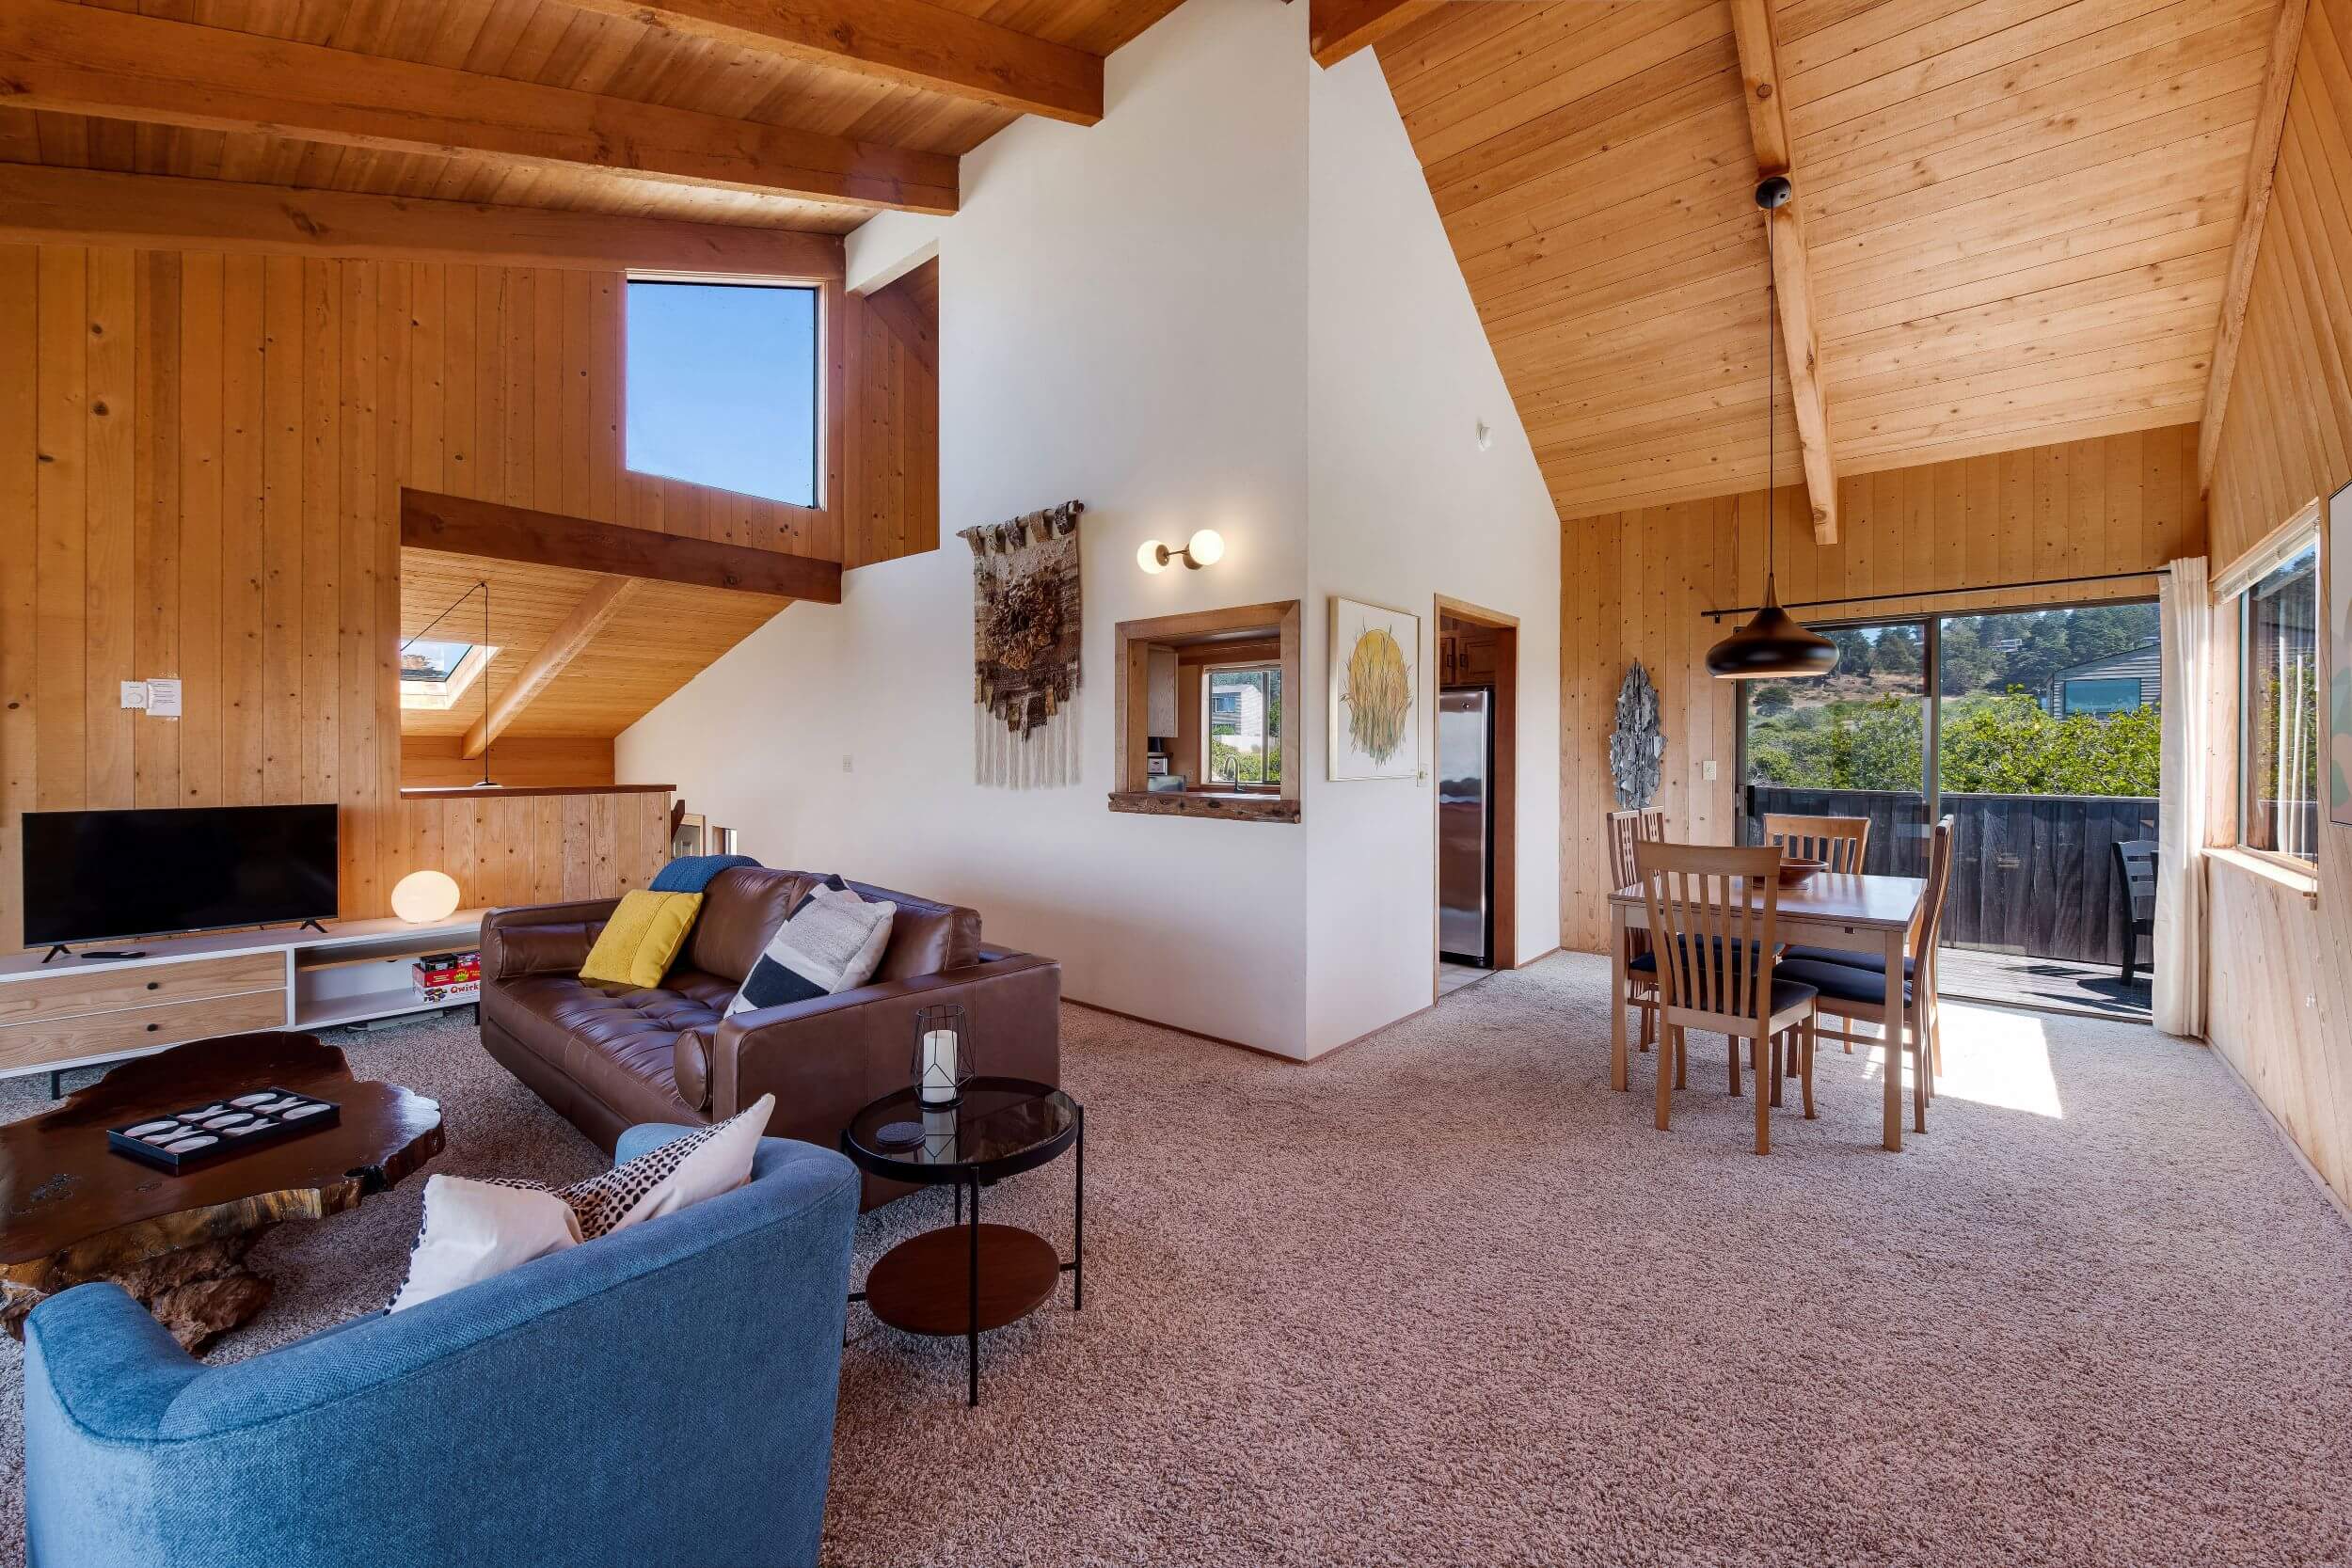 Sea Meadow: large open living room with wood ceilings with view of dining table.